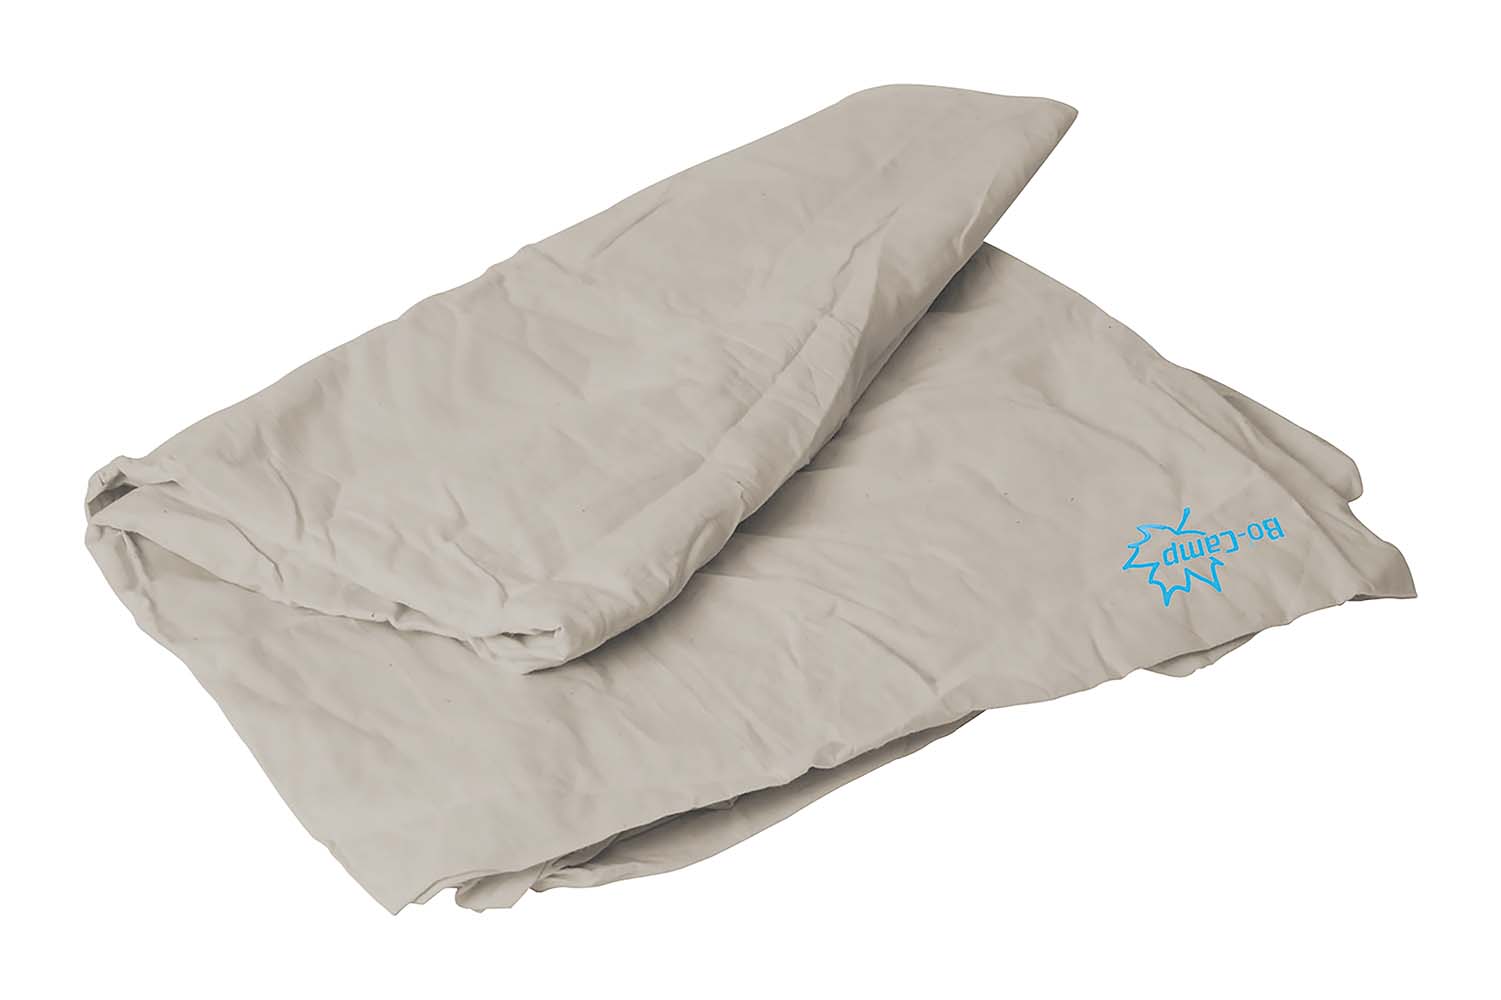 3605790 A comfortable sleeping bag sheet. This straight model sleeping bag sheet is made from soft polycotton and has an extra sturdy instep. Supplied in a case.